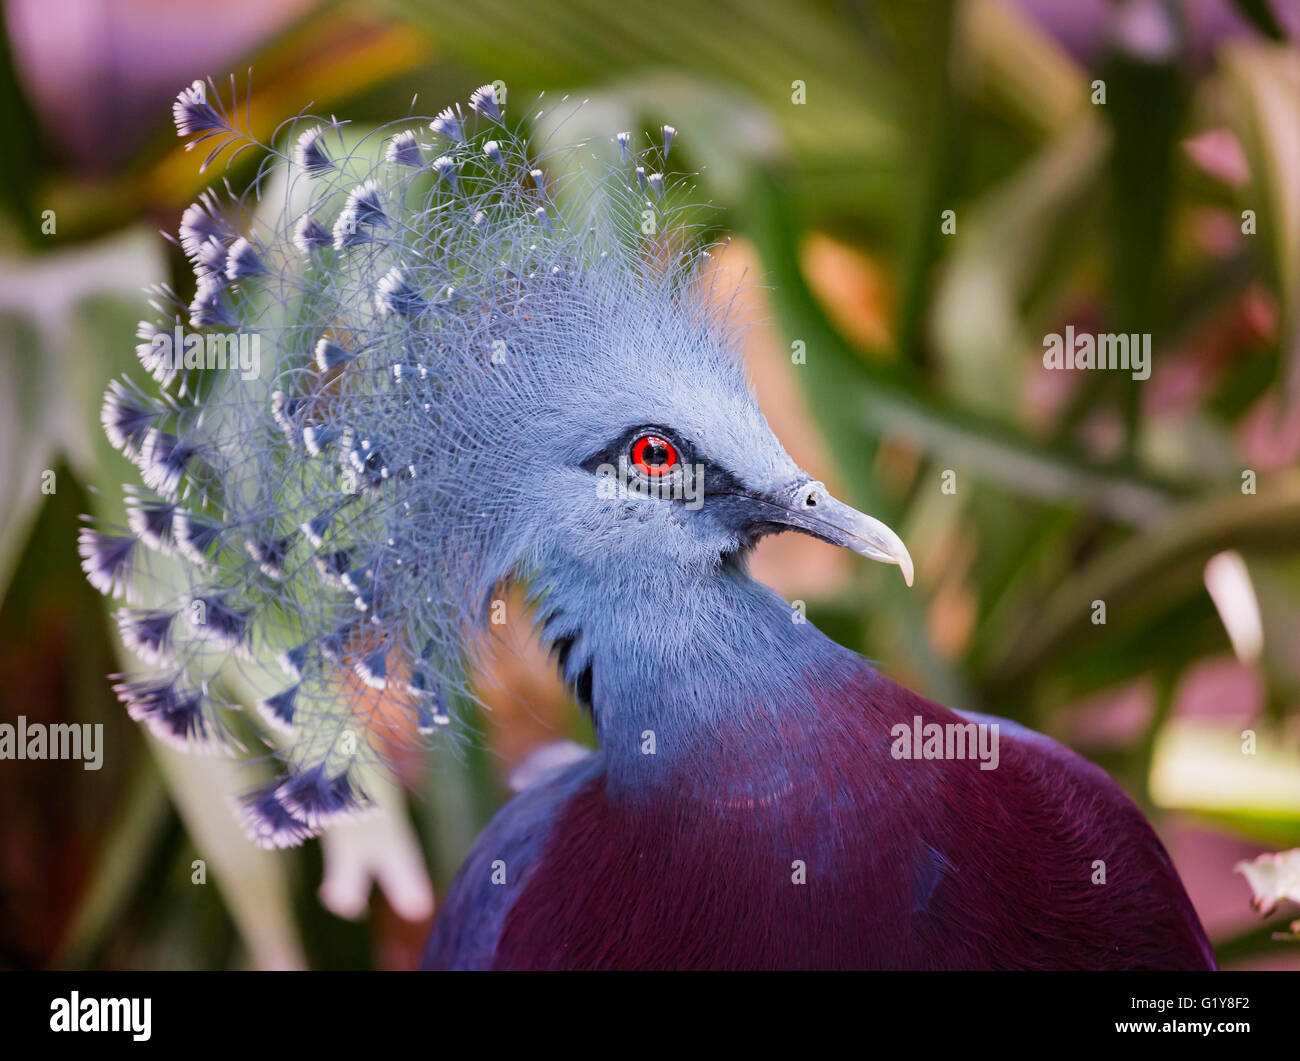 Crowned pigeon close up Stock Photo